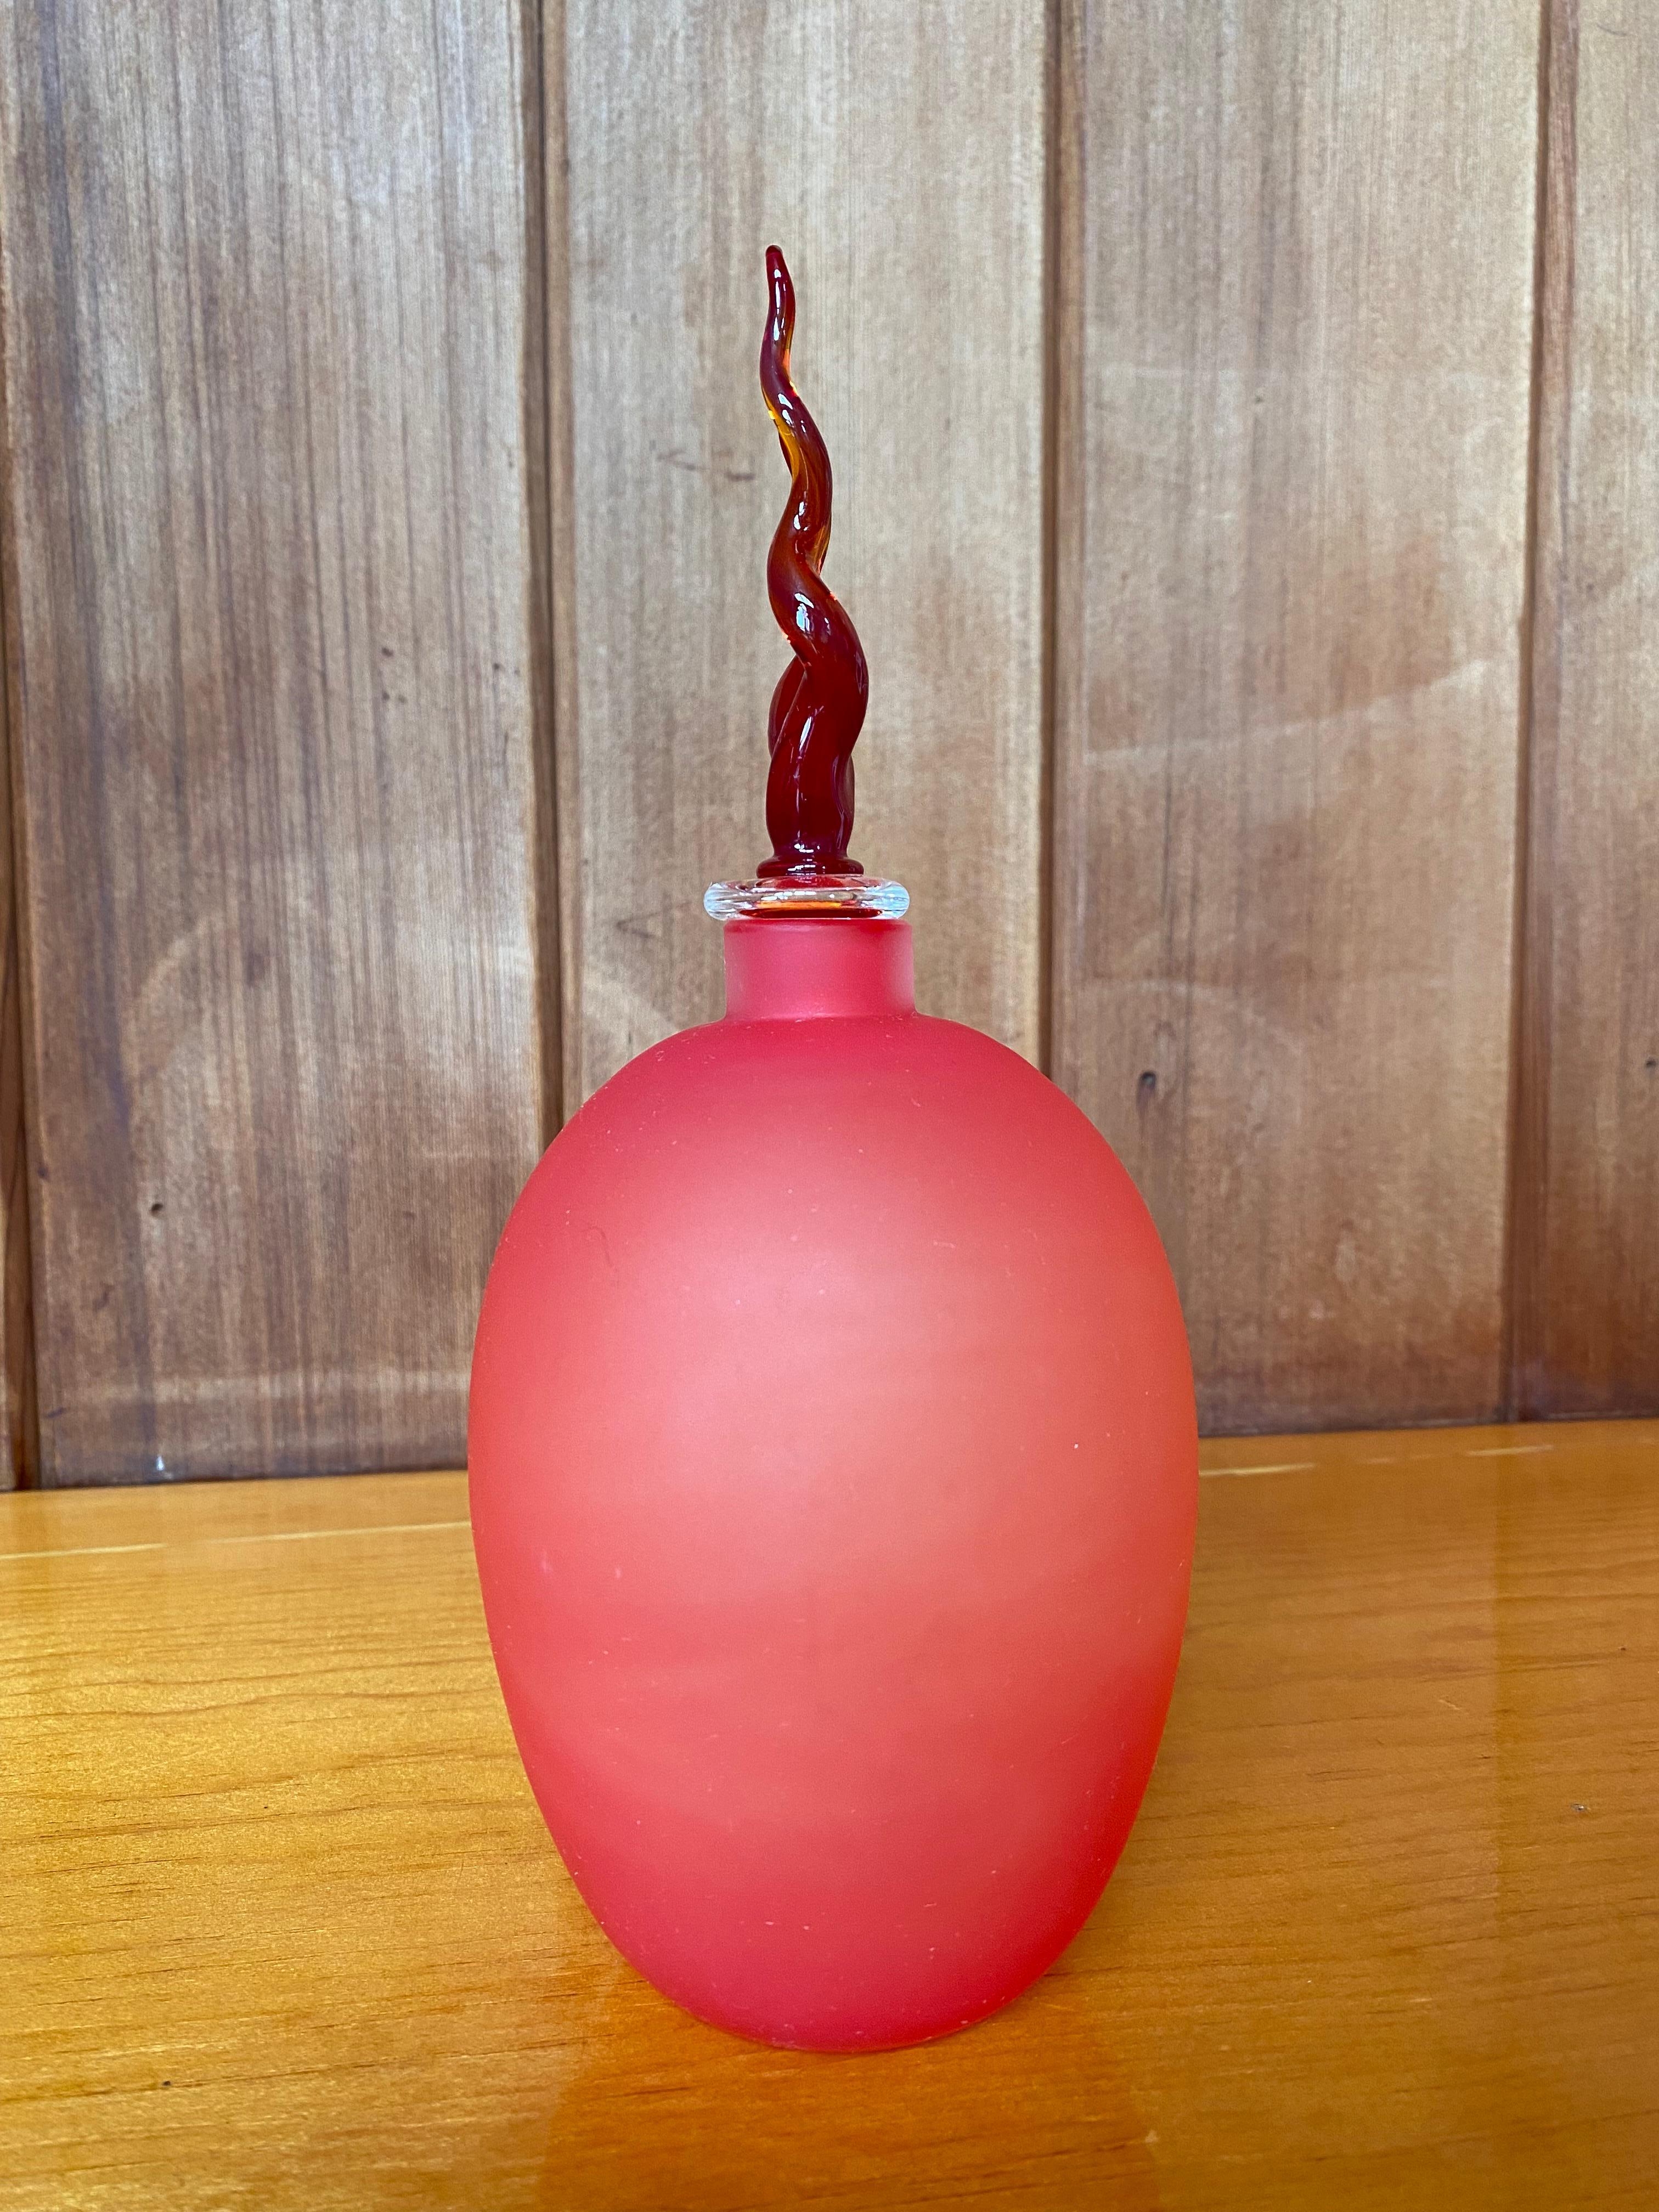 Red murano glass bottle by LIP Manifattura del Vetro designed by Marcello Furlan, 1989.
Natural occurrence of color variation in marbling from red, orange and peach.
Sticker still remains.
Small marking near sticker; has not been professionally